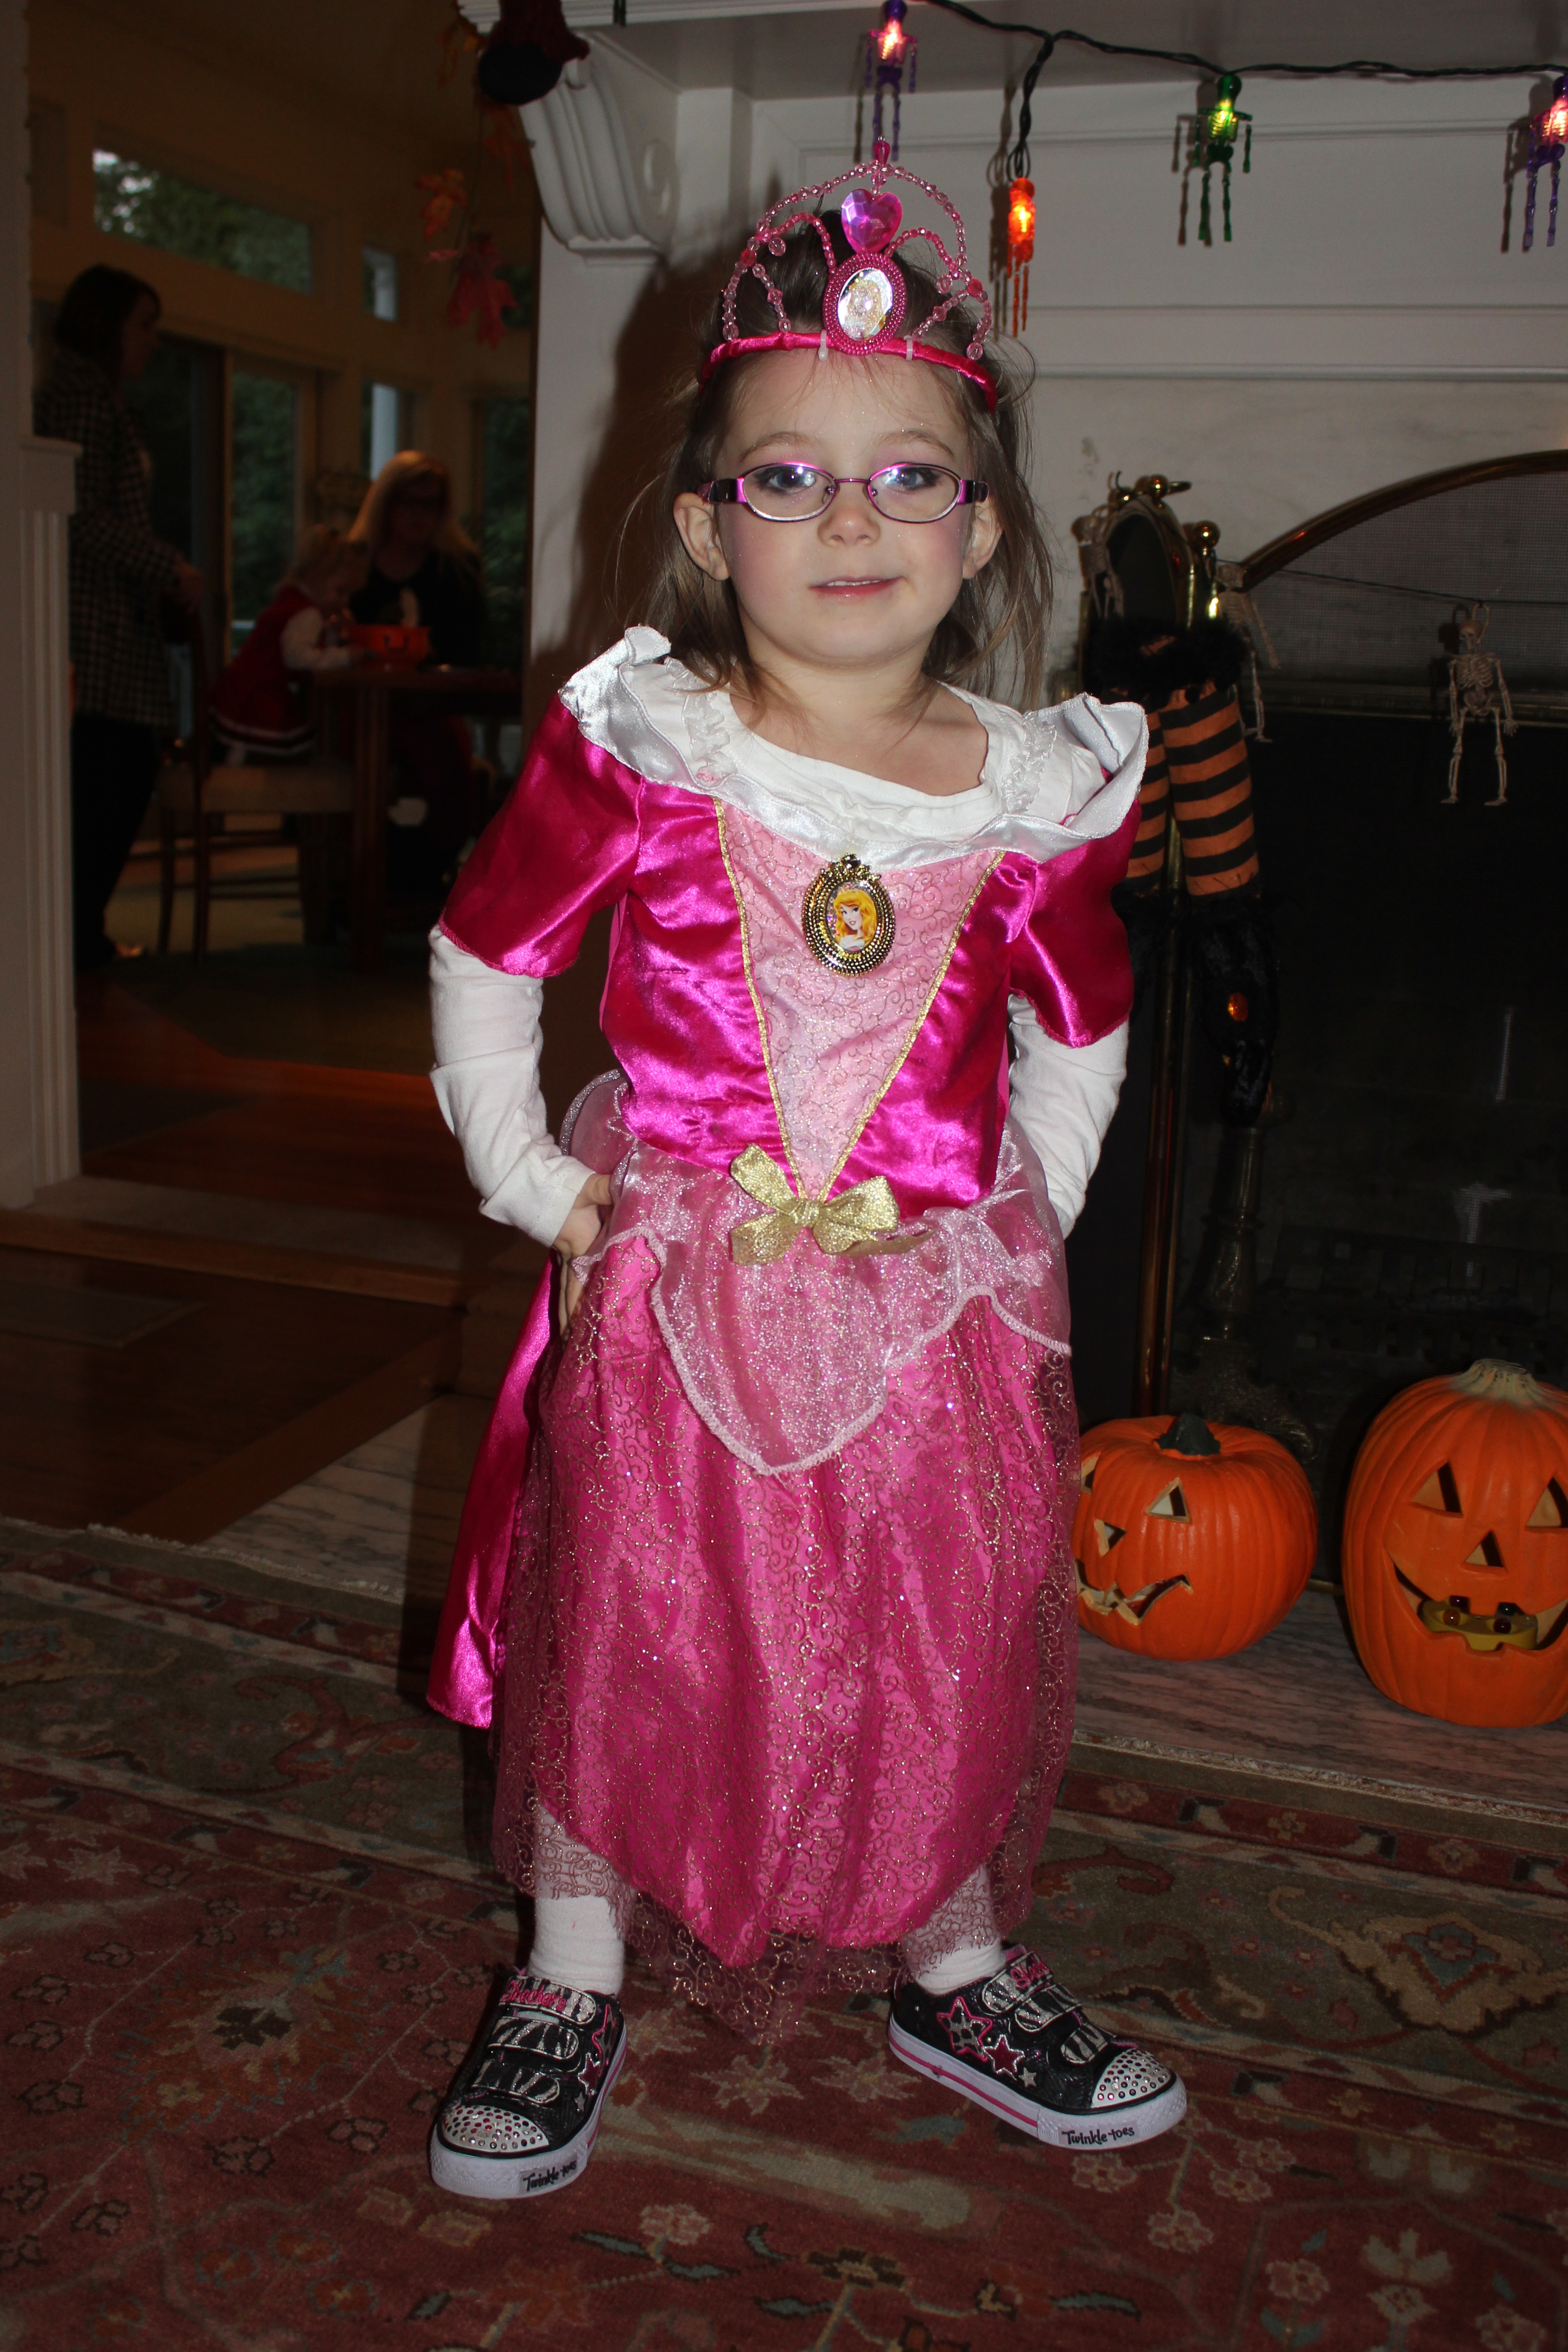 One Princess Crown or Piece of Candy at a Time… – Family Scholar House